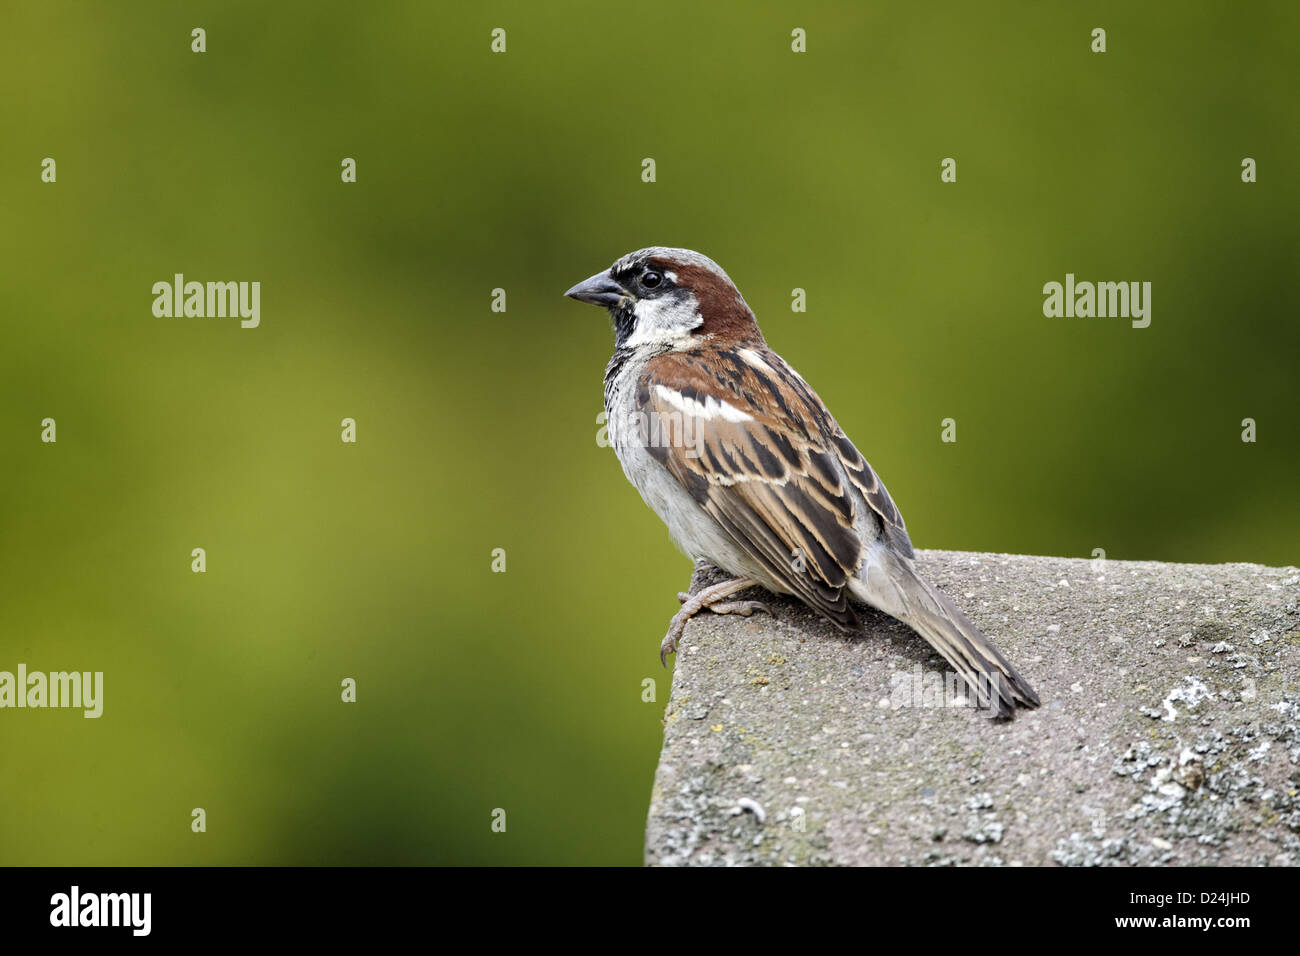 House Sparrow (Passer domesticus) adult male, standing on tiled roof, Staffordshire, England, August Stock Photo